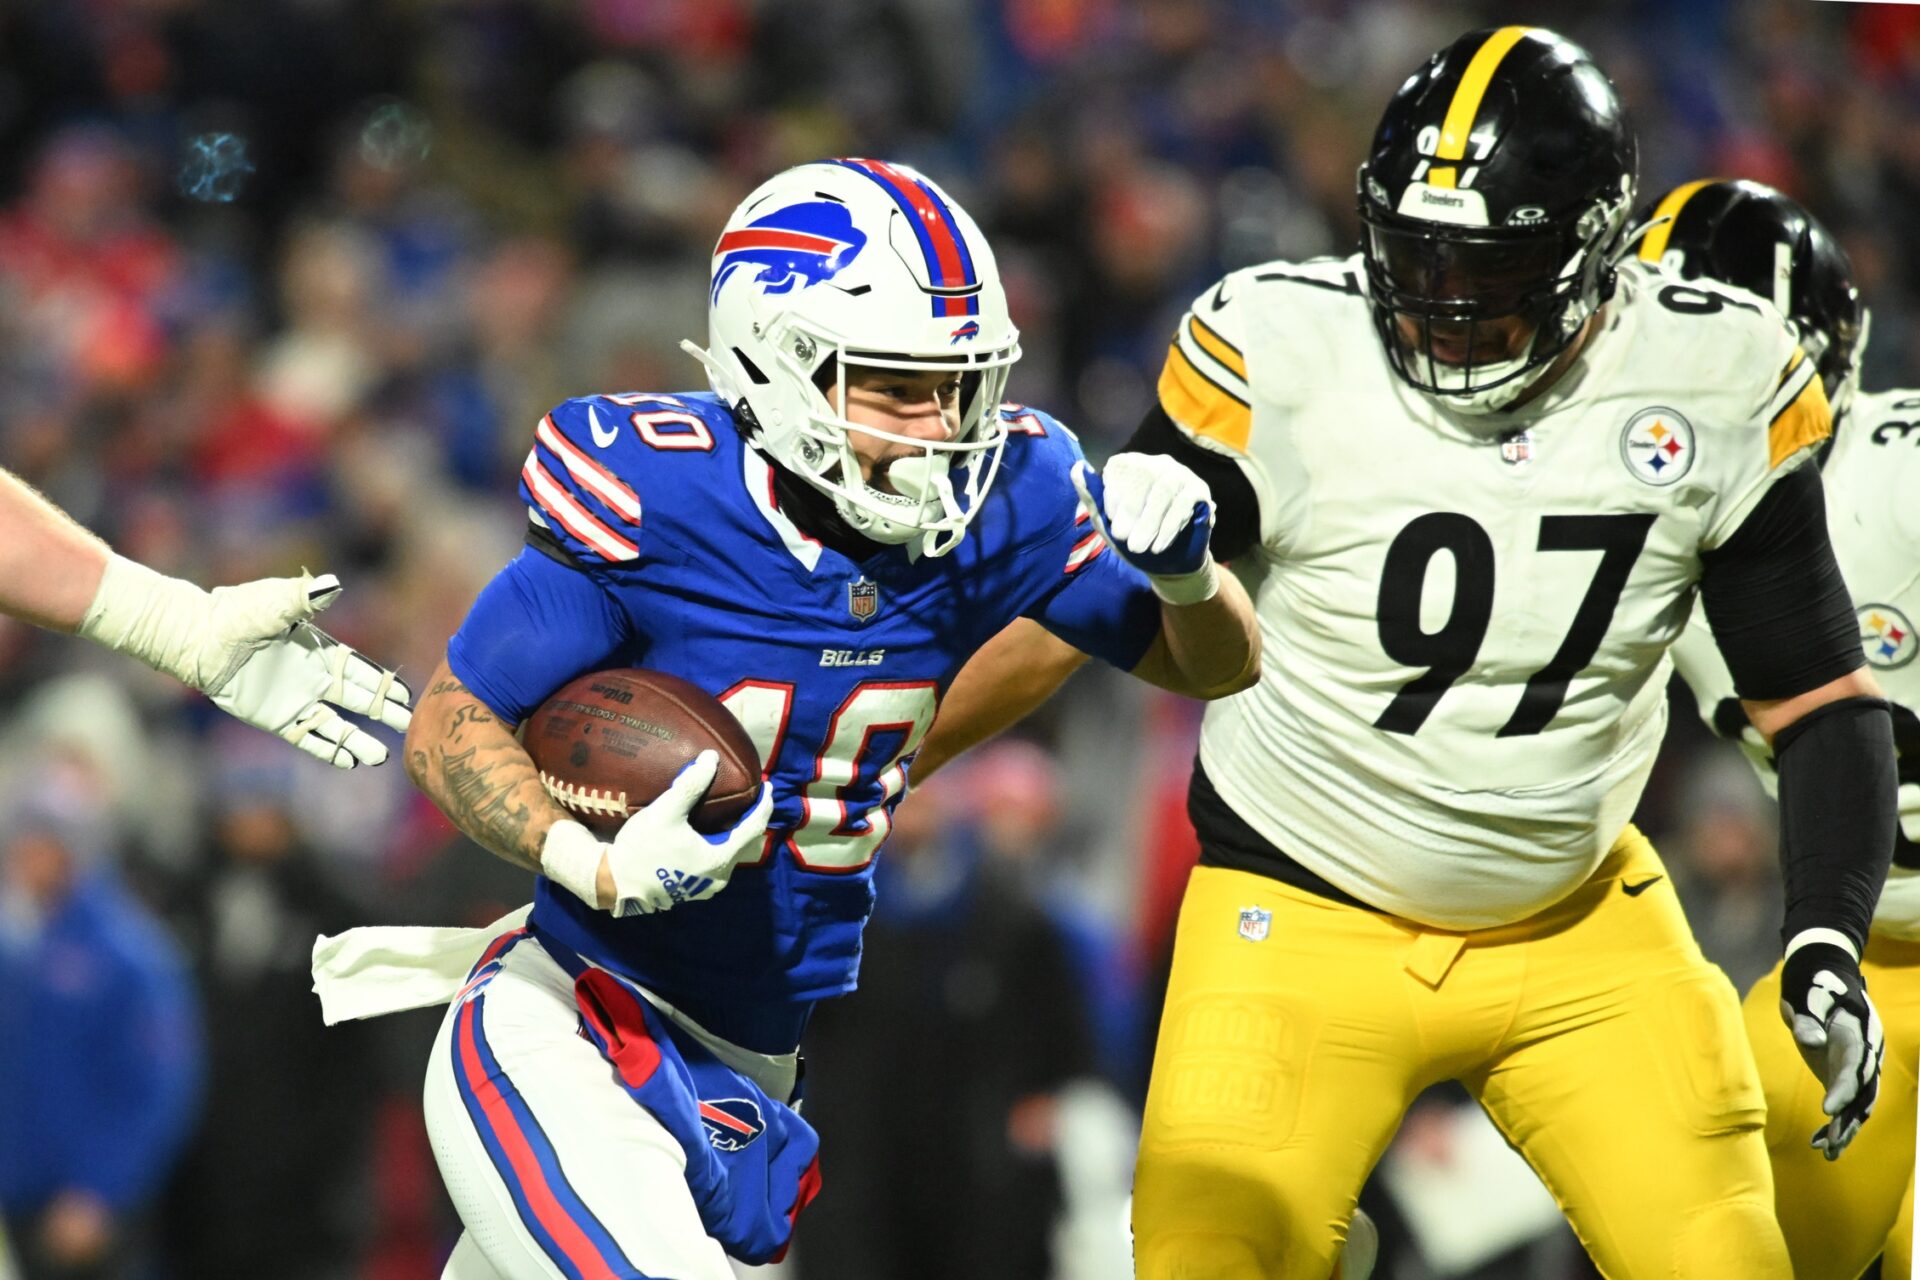 Buffalo Bills WR Khalil Shakir (10) runs with the ball against the Pittsburgh Steelers.